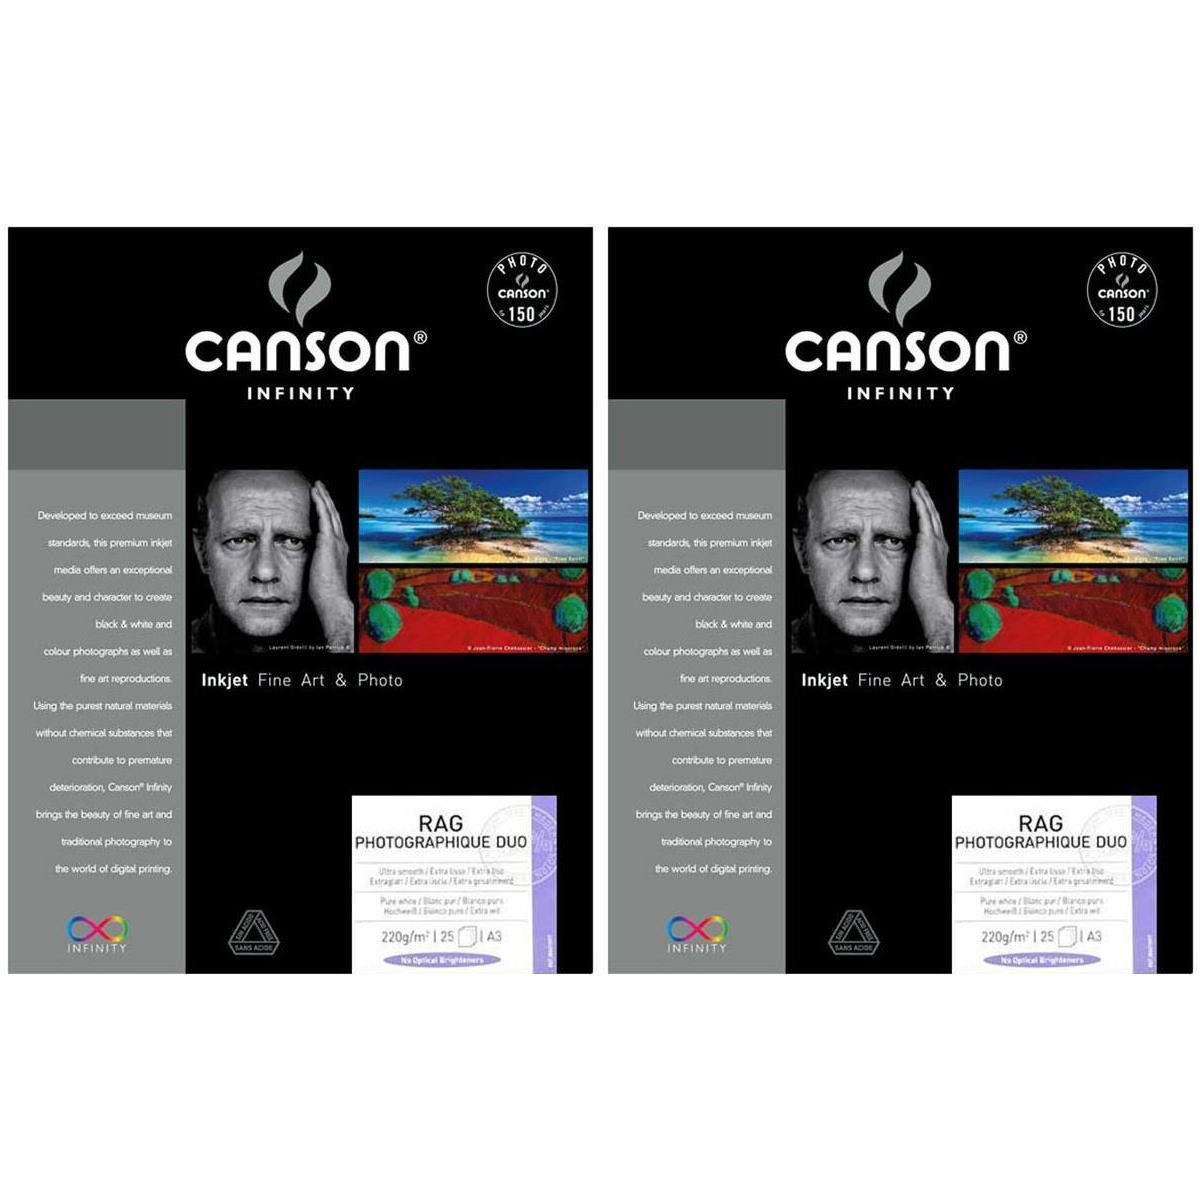 Image of Canson Infinity 2x Infinity Rag graphique Duo Photo Paper 13x19&quot; 25 Sheets